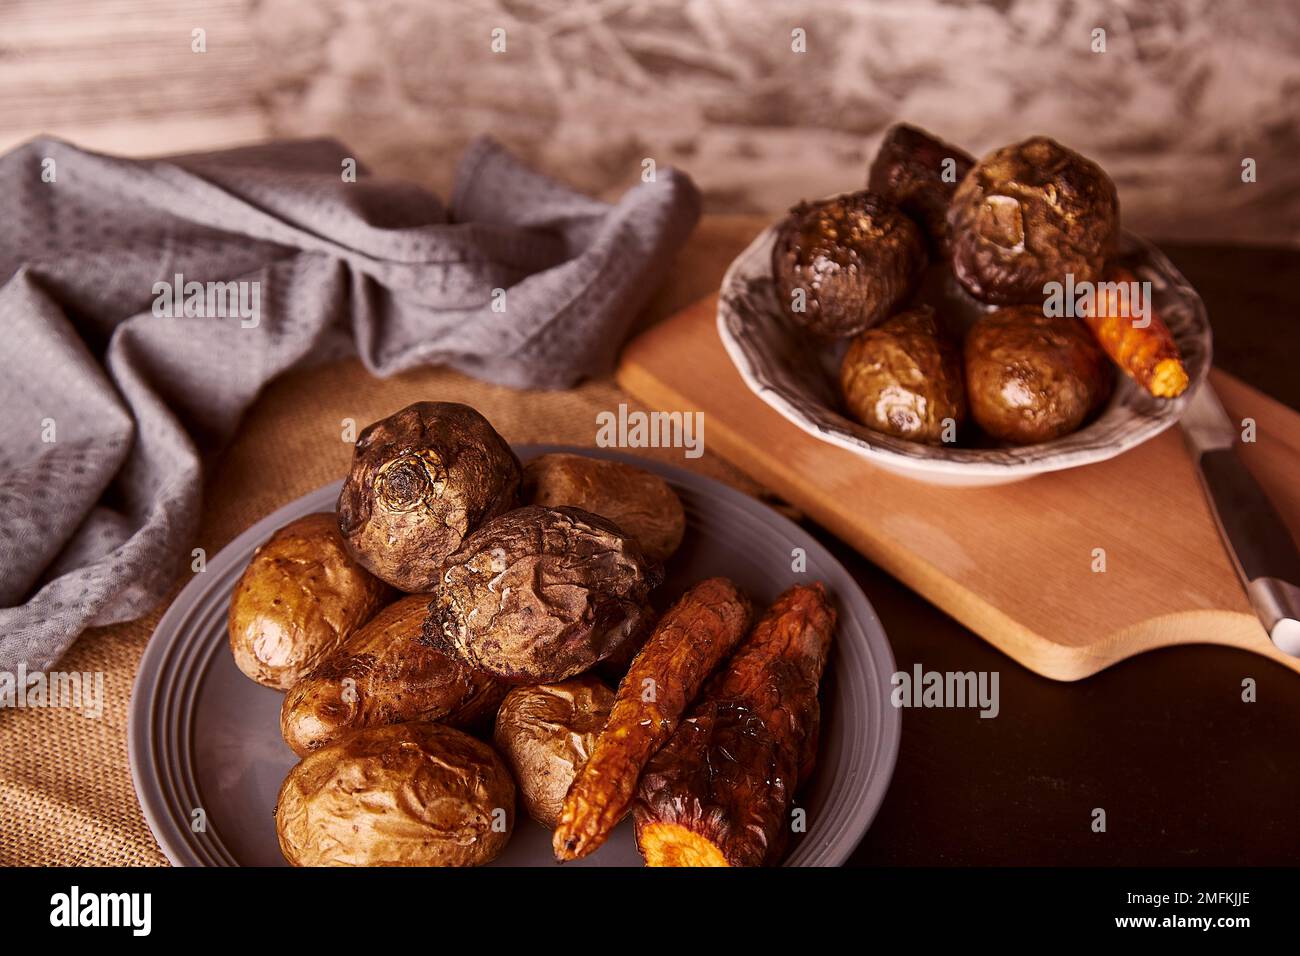 Baked healthy vegetables on rustic background - carrots, potatoes, beetroot. Whole food diet, Mediterranean diet Stock Photo